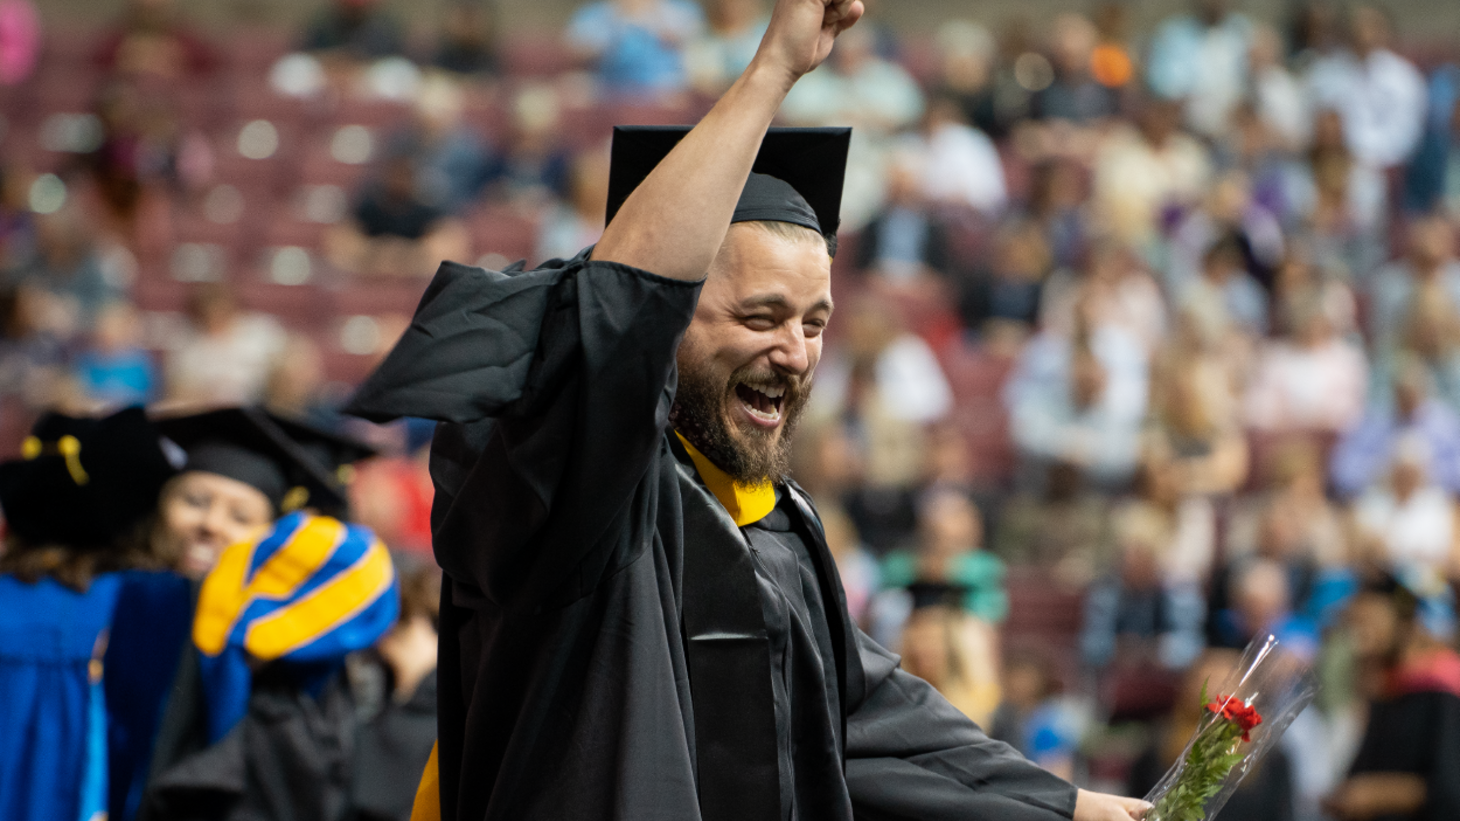 man in cap and gown attire with fist in the air. 